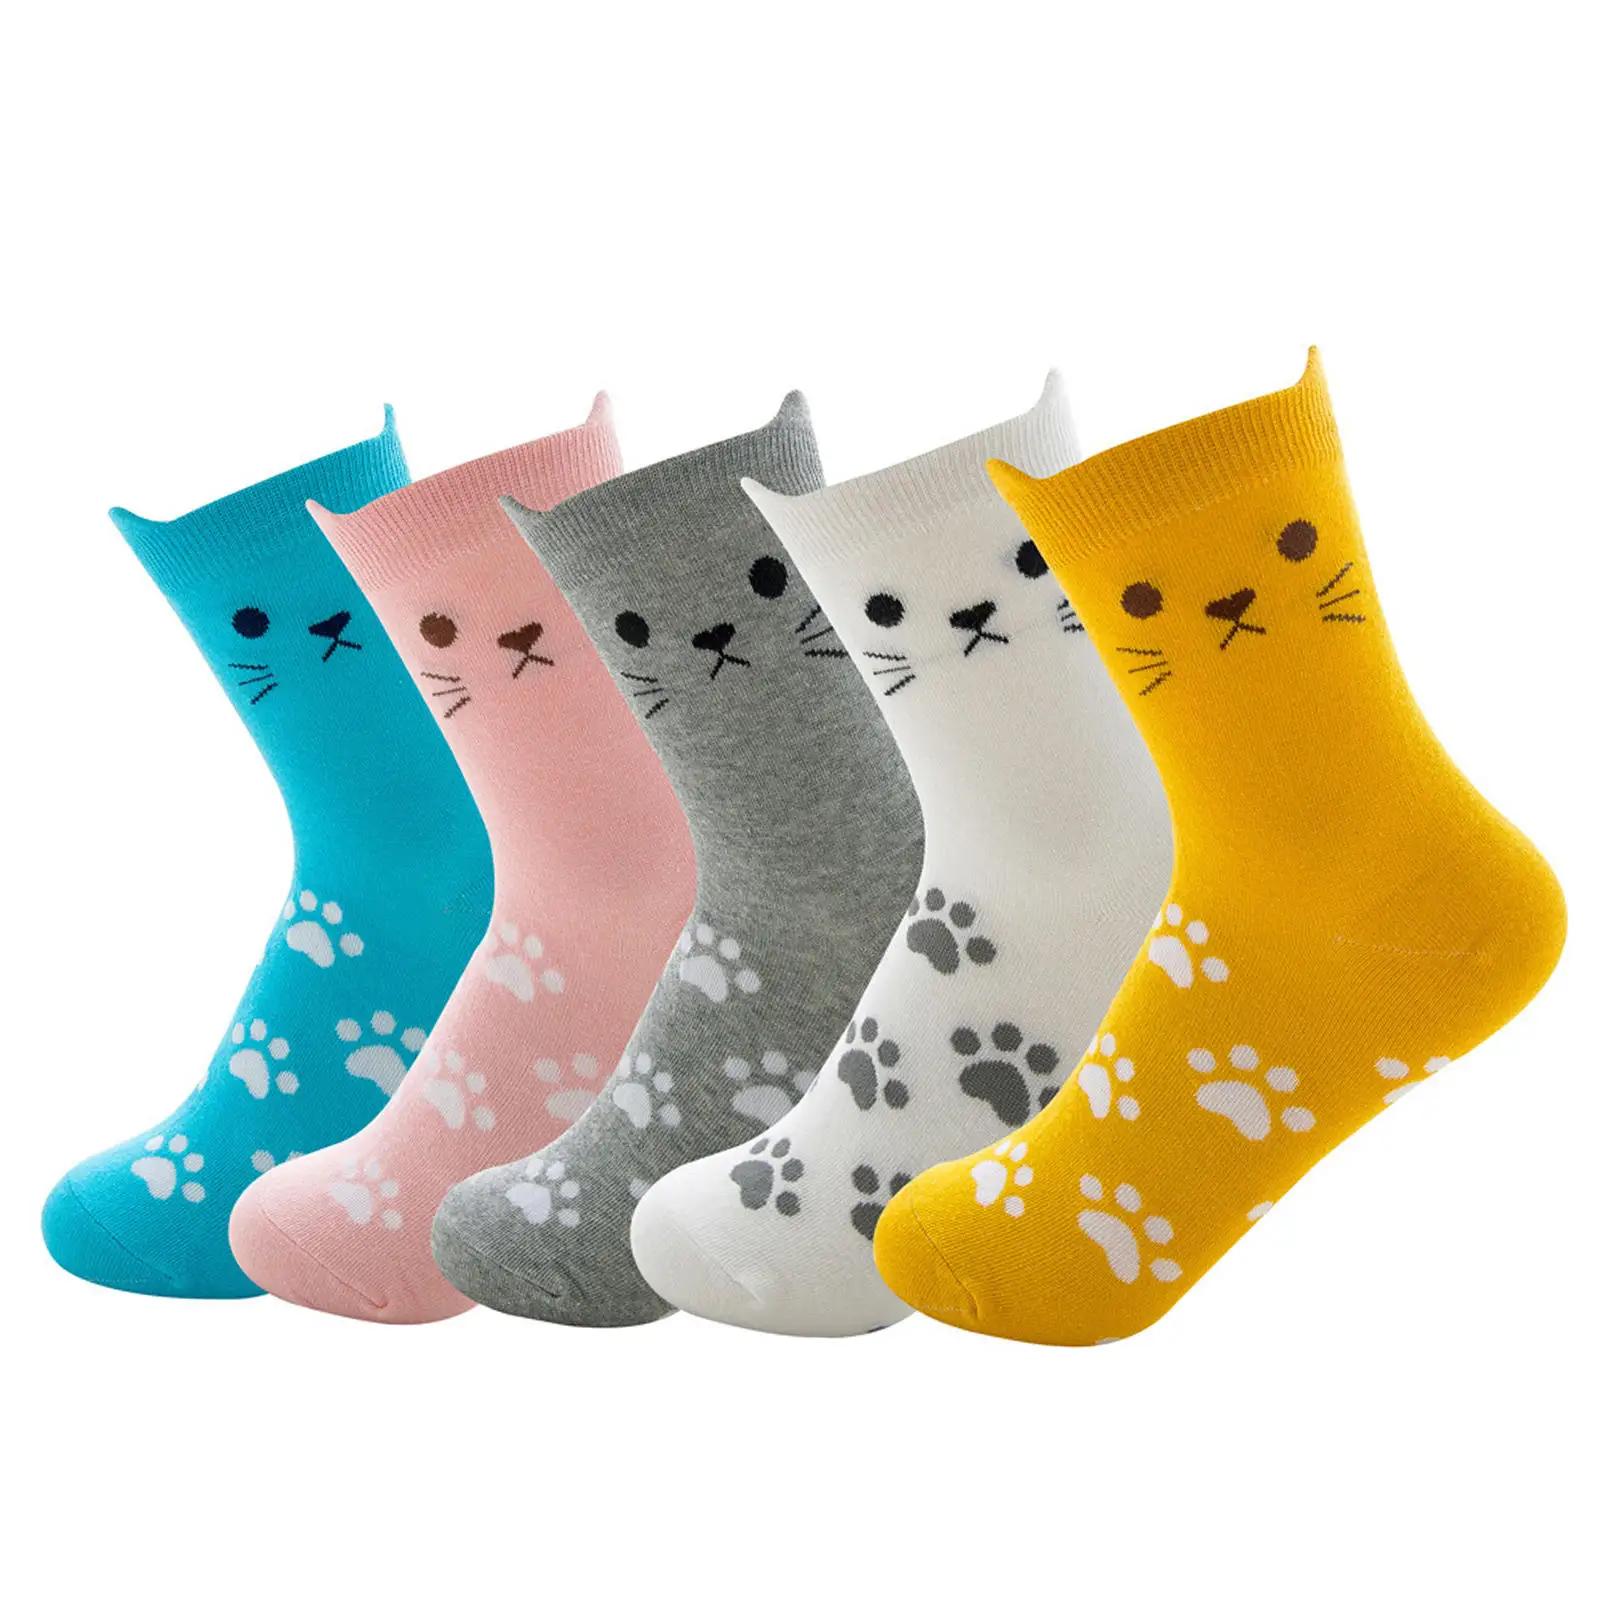 5 Pairs Ladies Womens Socks Cotton Cute Stretch Funny Casual Animal Design Novelty Socks